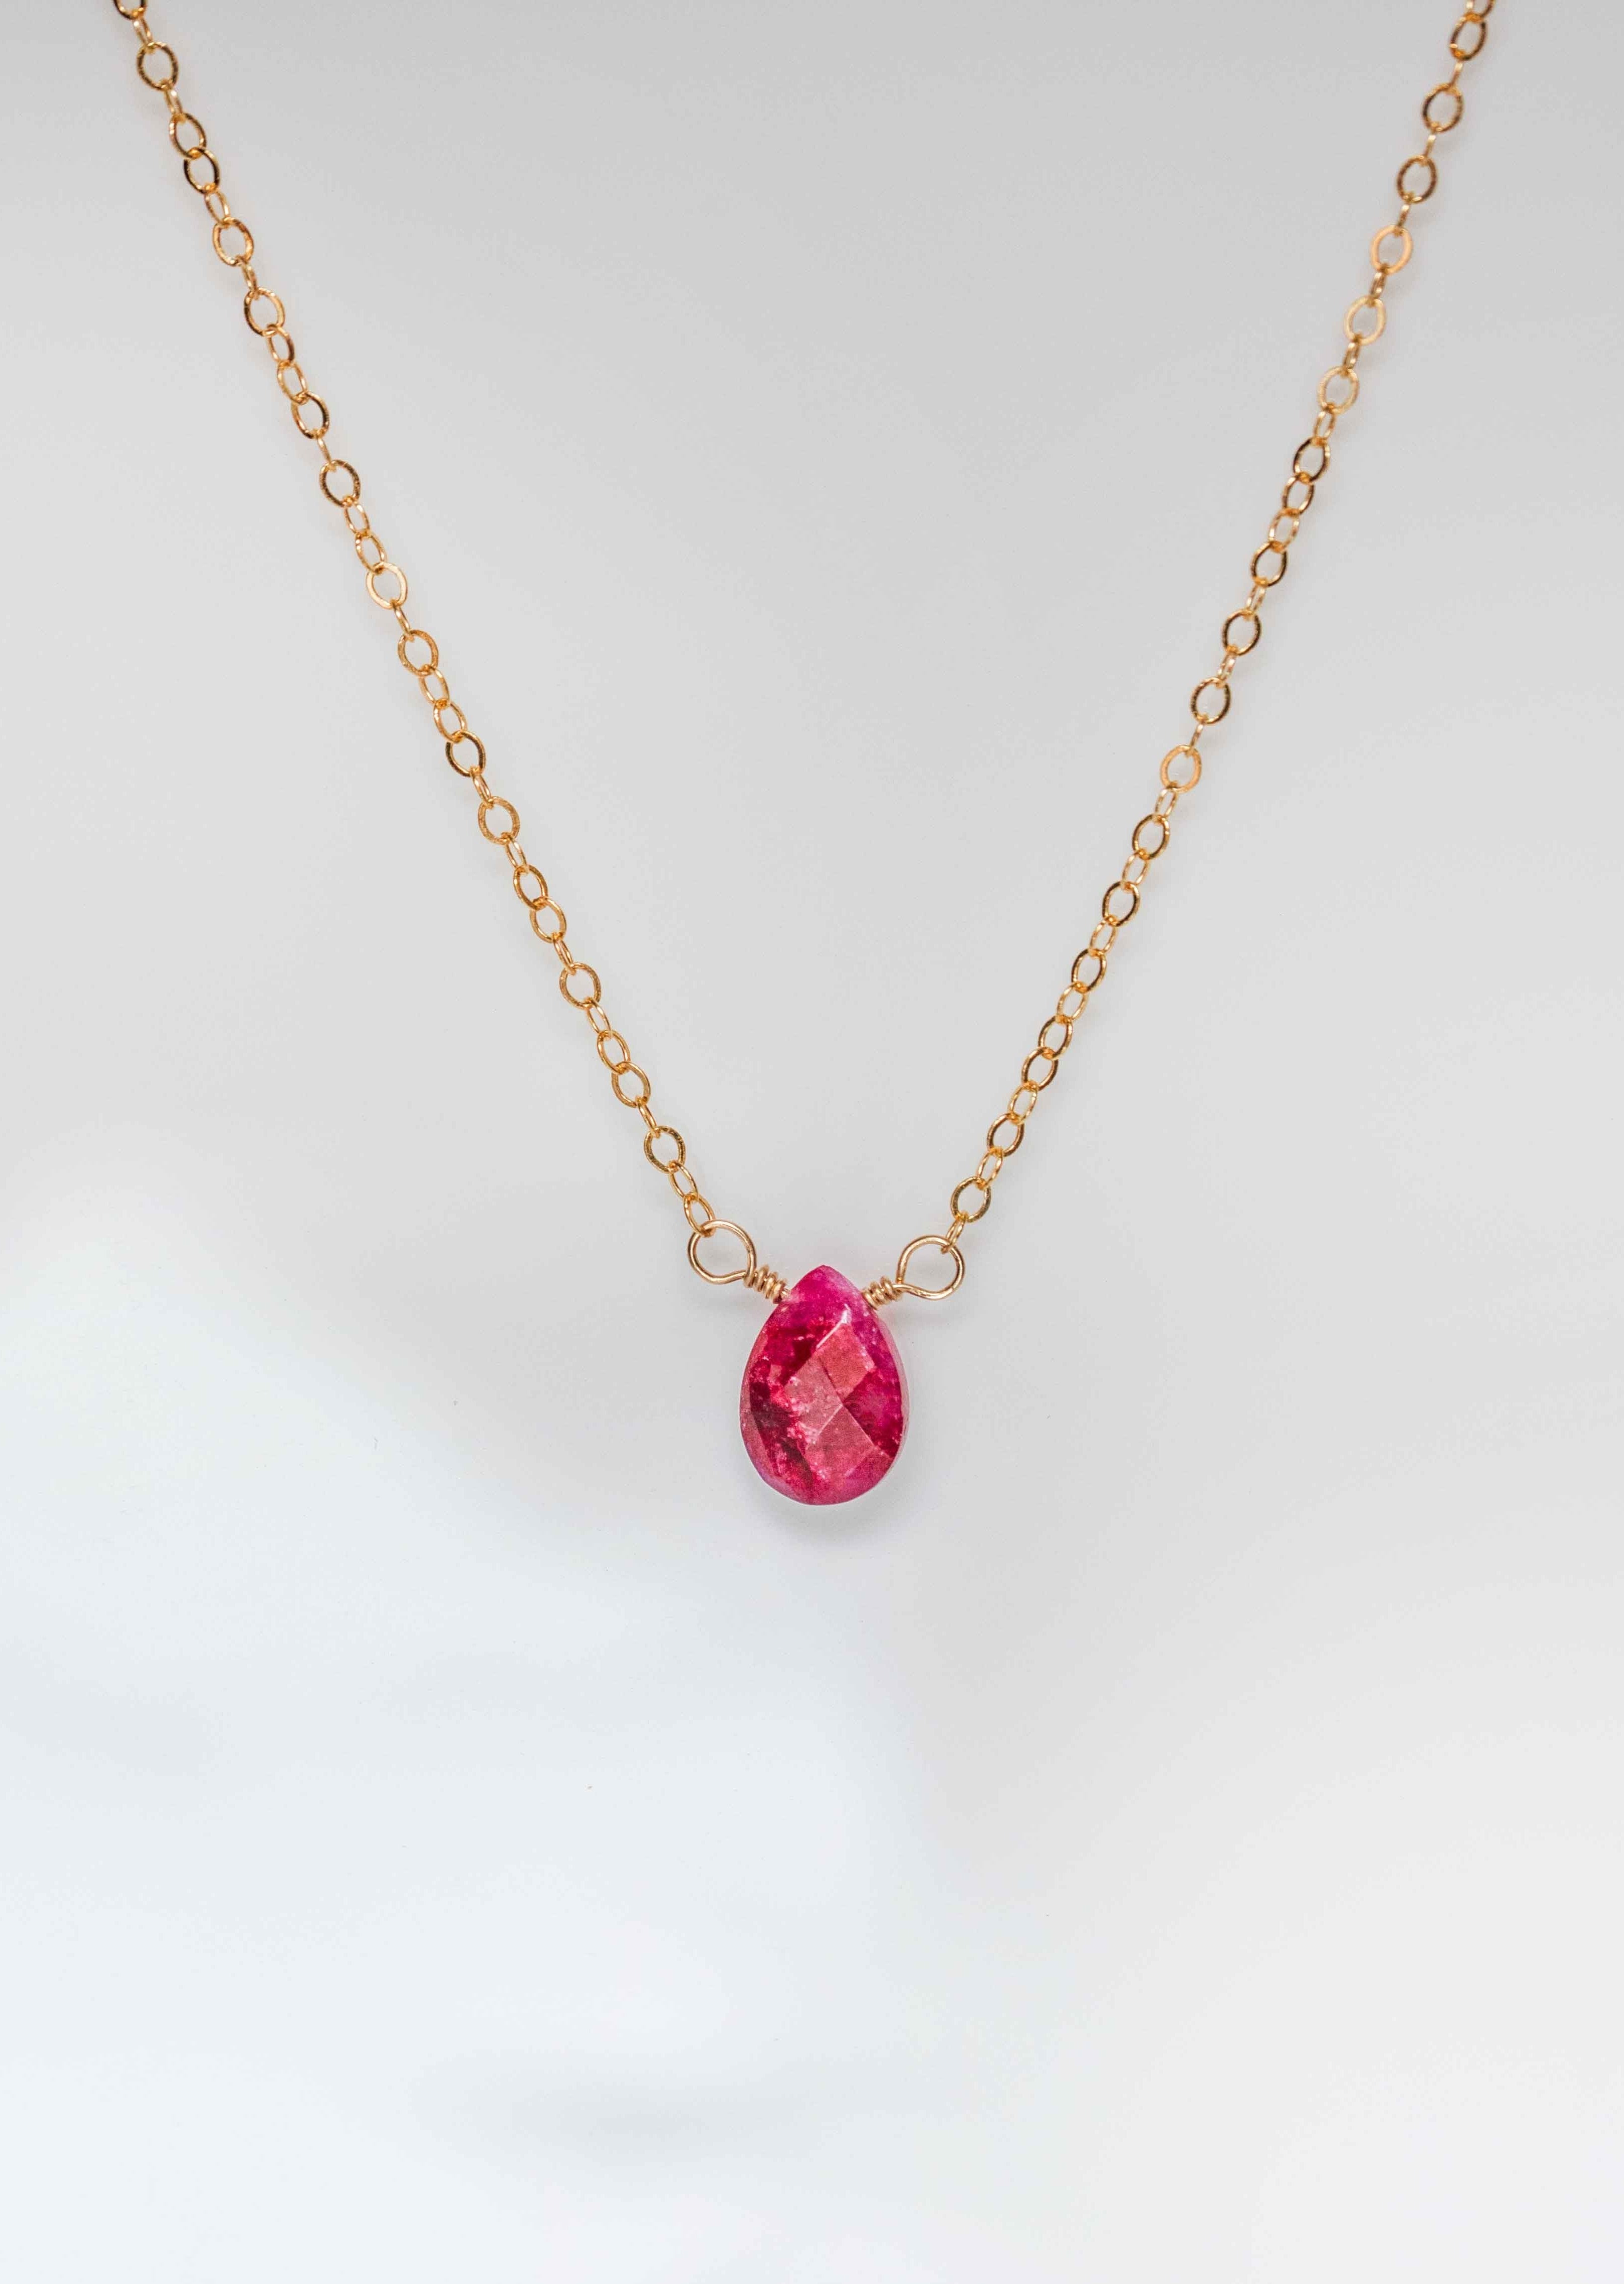 Tiny Ruby@Heart Slider Necklace Love and passion